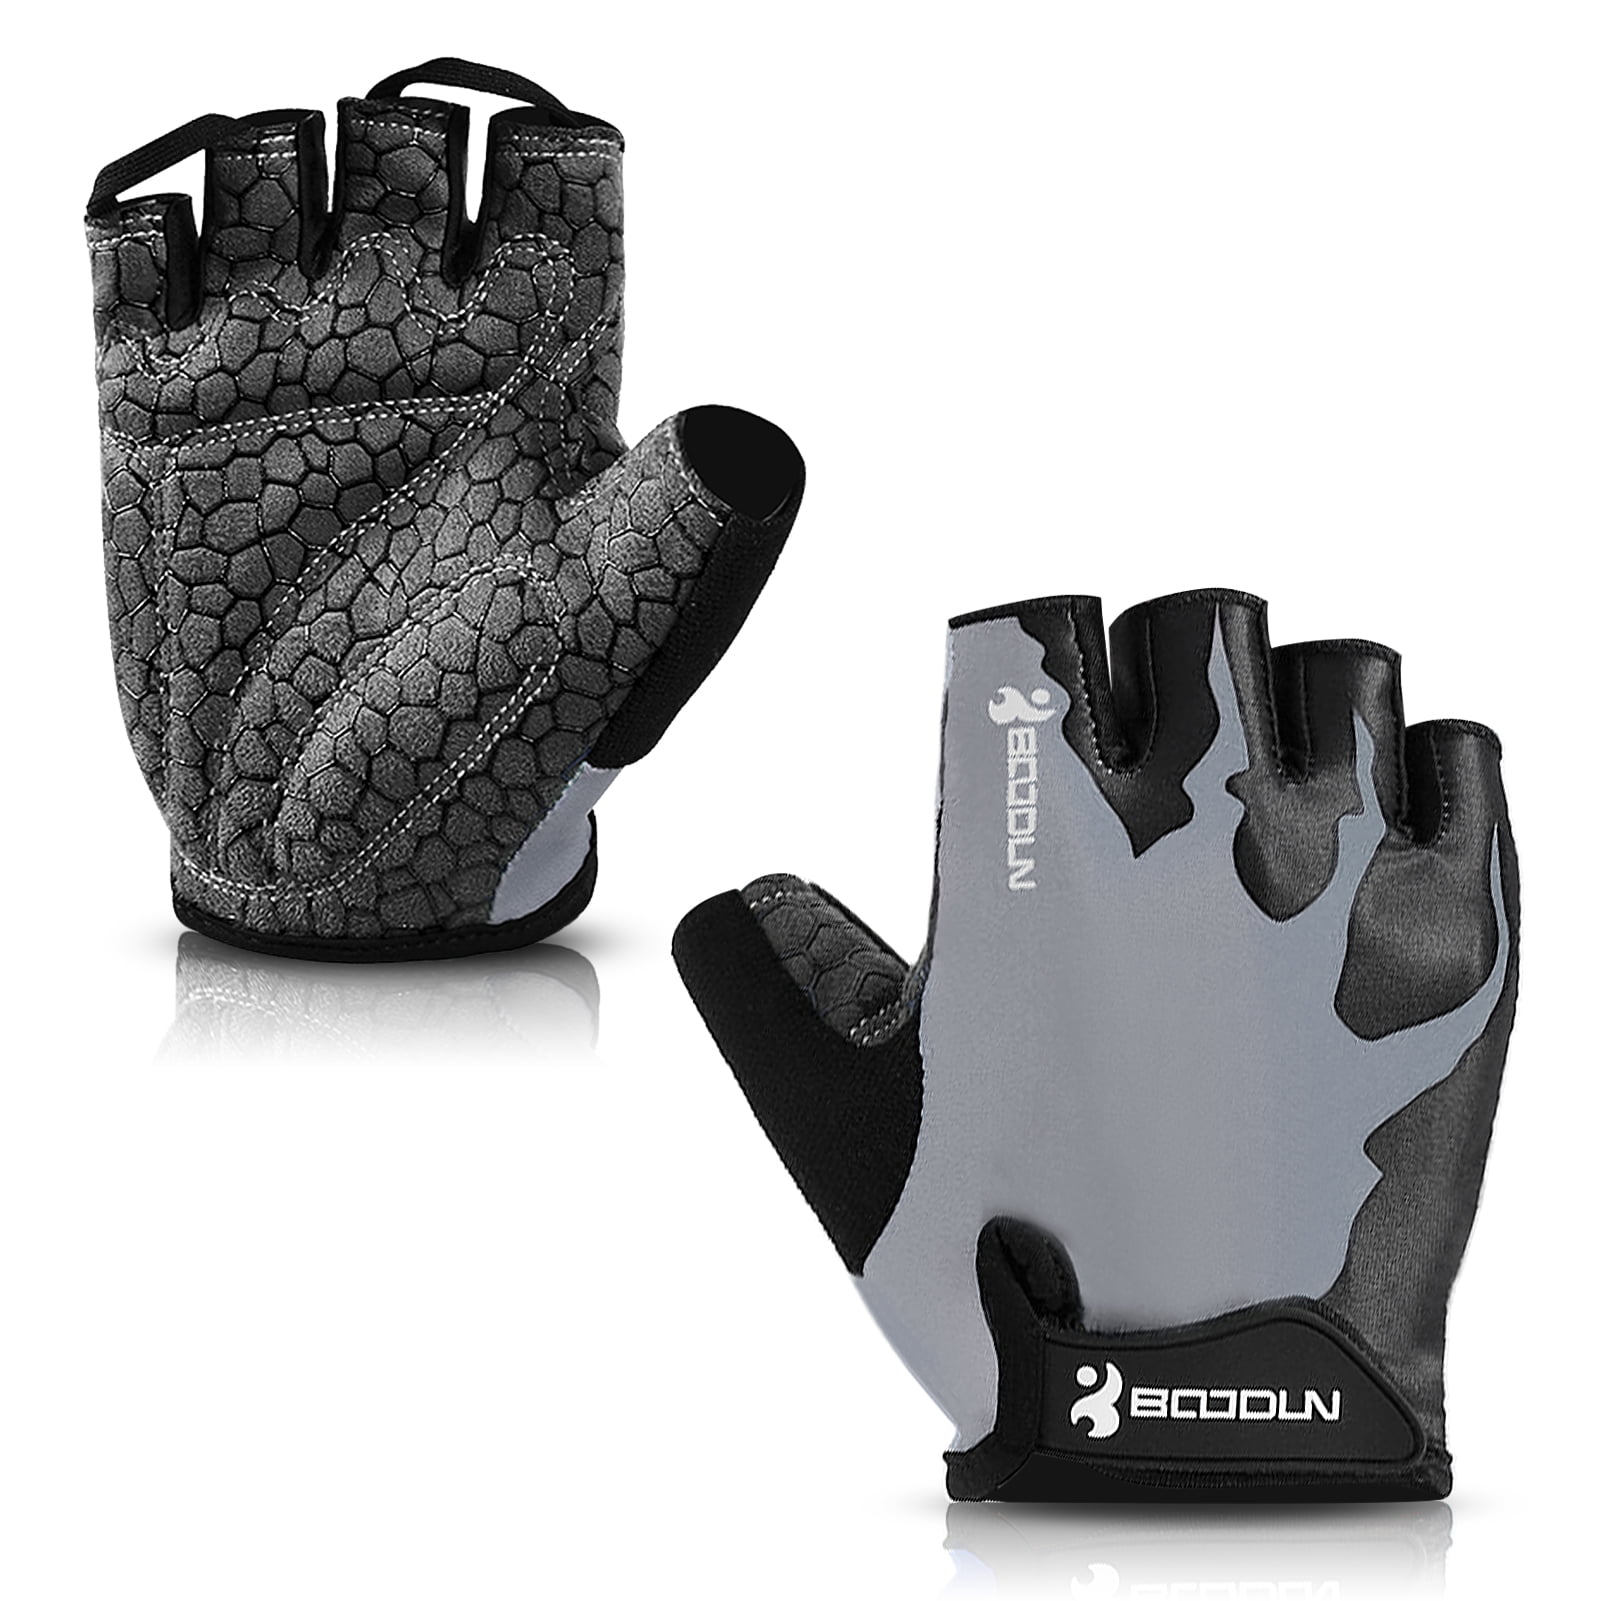 1 Size XL Black New SPORTS GEAR Details about   Weight Lifting Gloves 2 Size L 